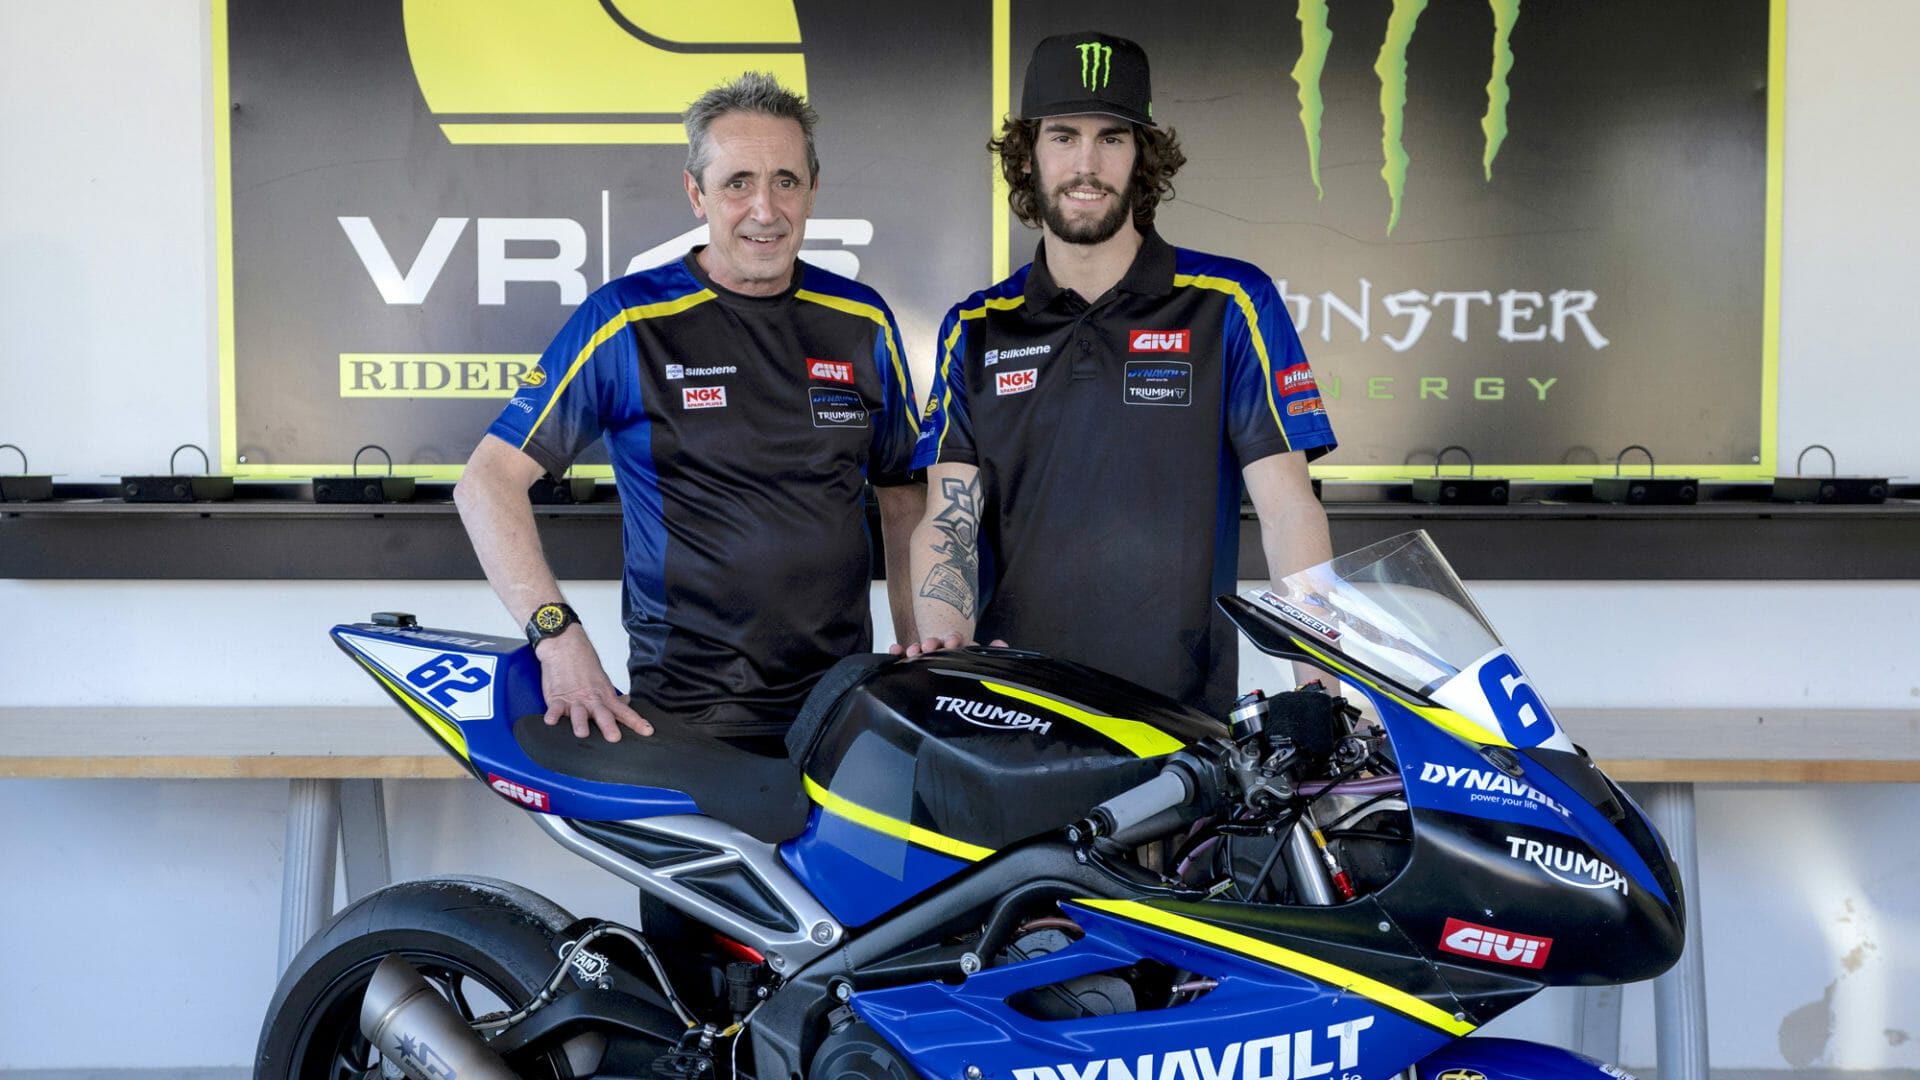 Triumph also in the Supersport World Championship
- also in the MOTORCYCLES.NEWS APP